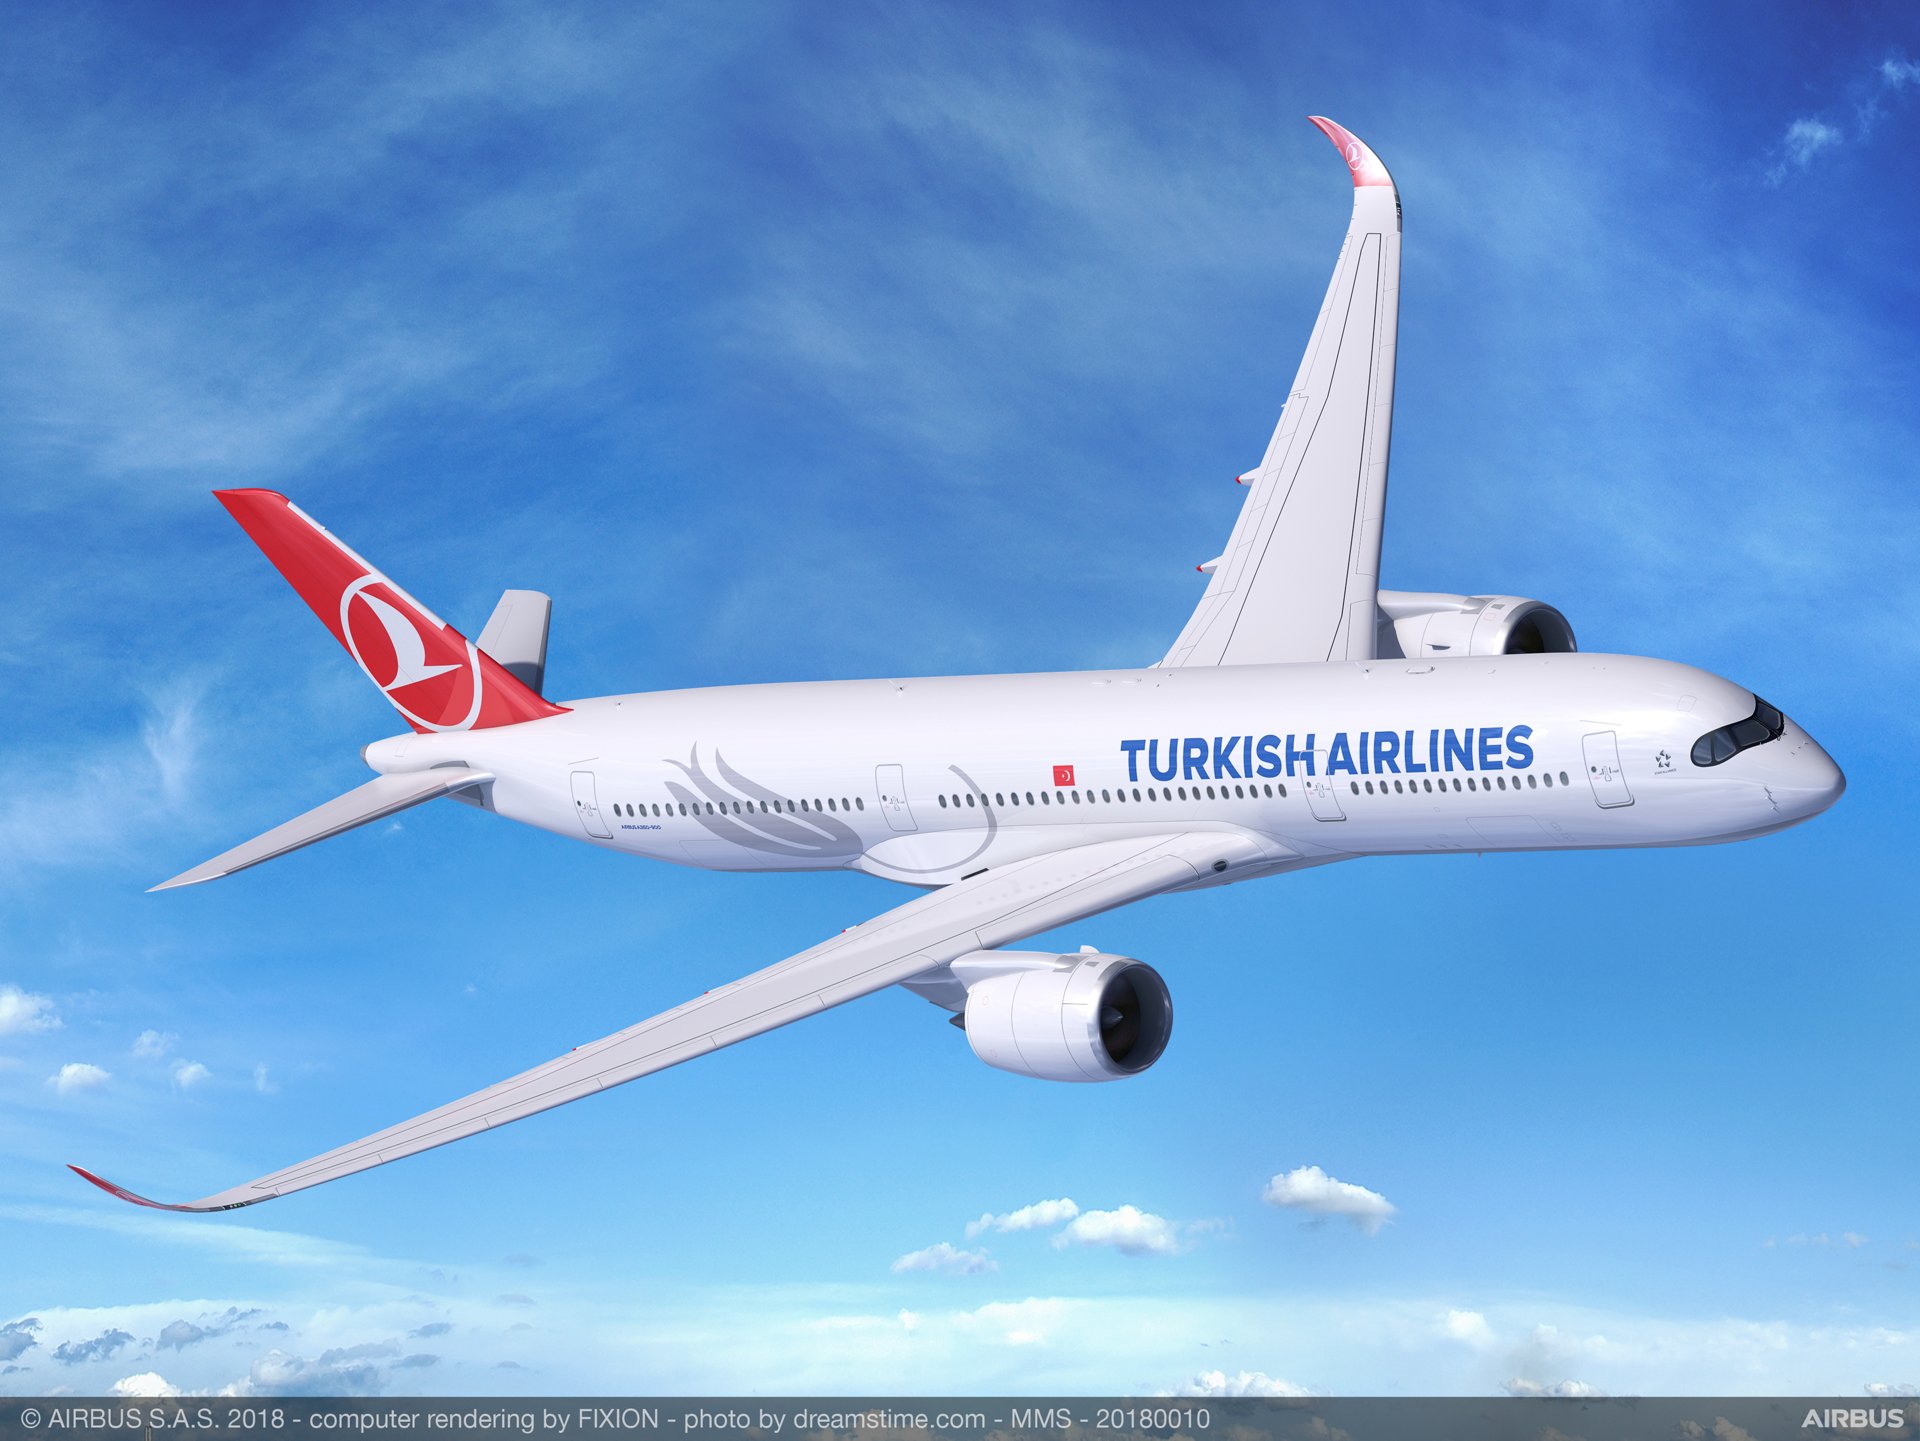 Turkish Airlines selects A350 XWB, lifting its fleet to new heights